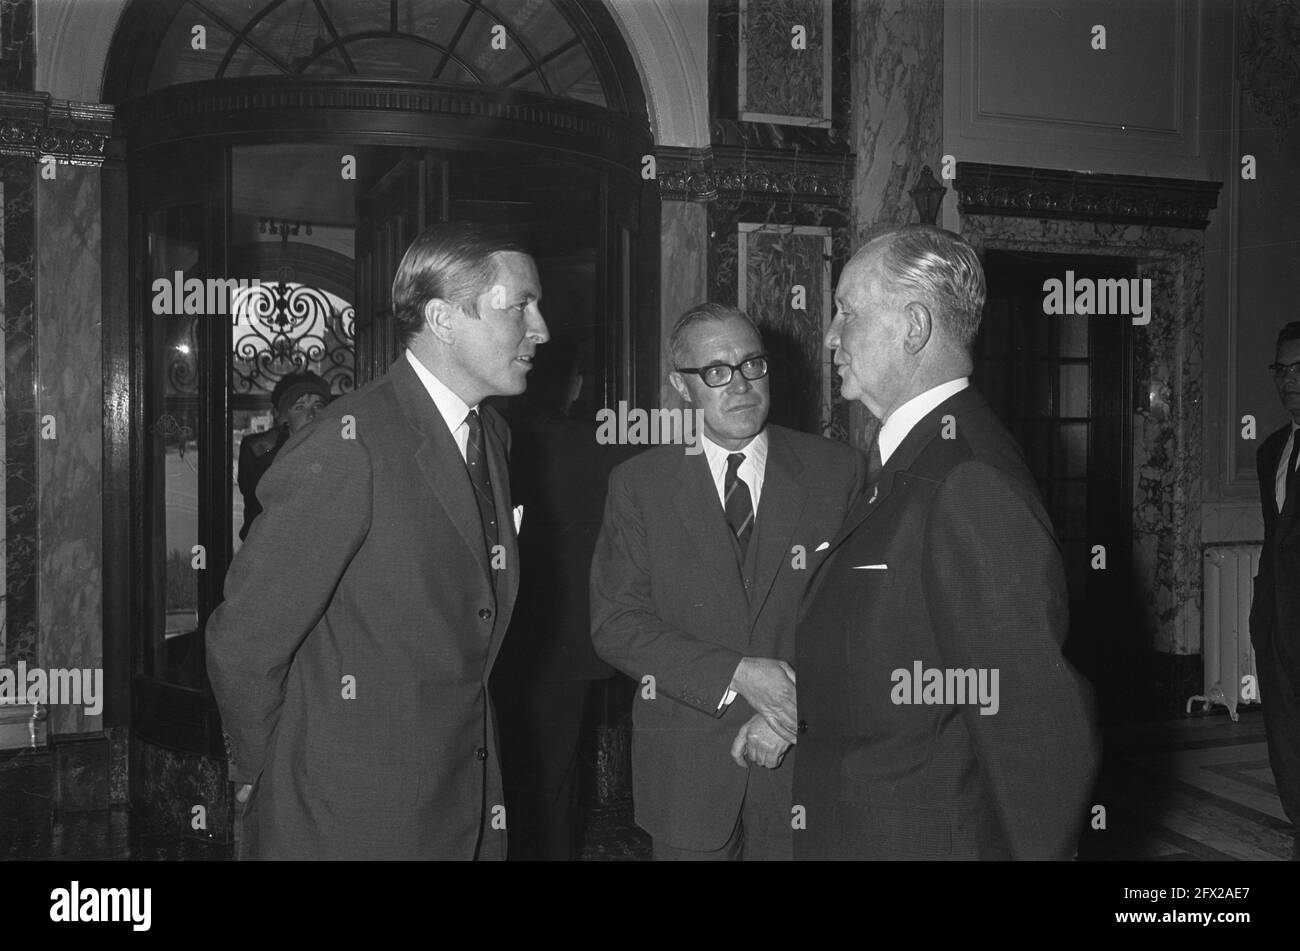 Left Prince Claus, center Mr. Van der Schelle and right Mr. L. Schepers, October 5, 1966, princes, The Netherlands, 20th century press agency photo, news to remember, documentary, historic photography 1945-1990, visual stories, human history of the Twentieth Century, capturing moments in time Stock Photo